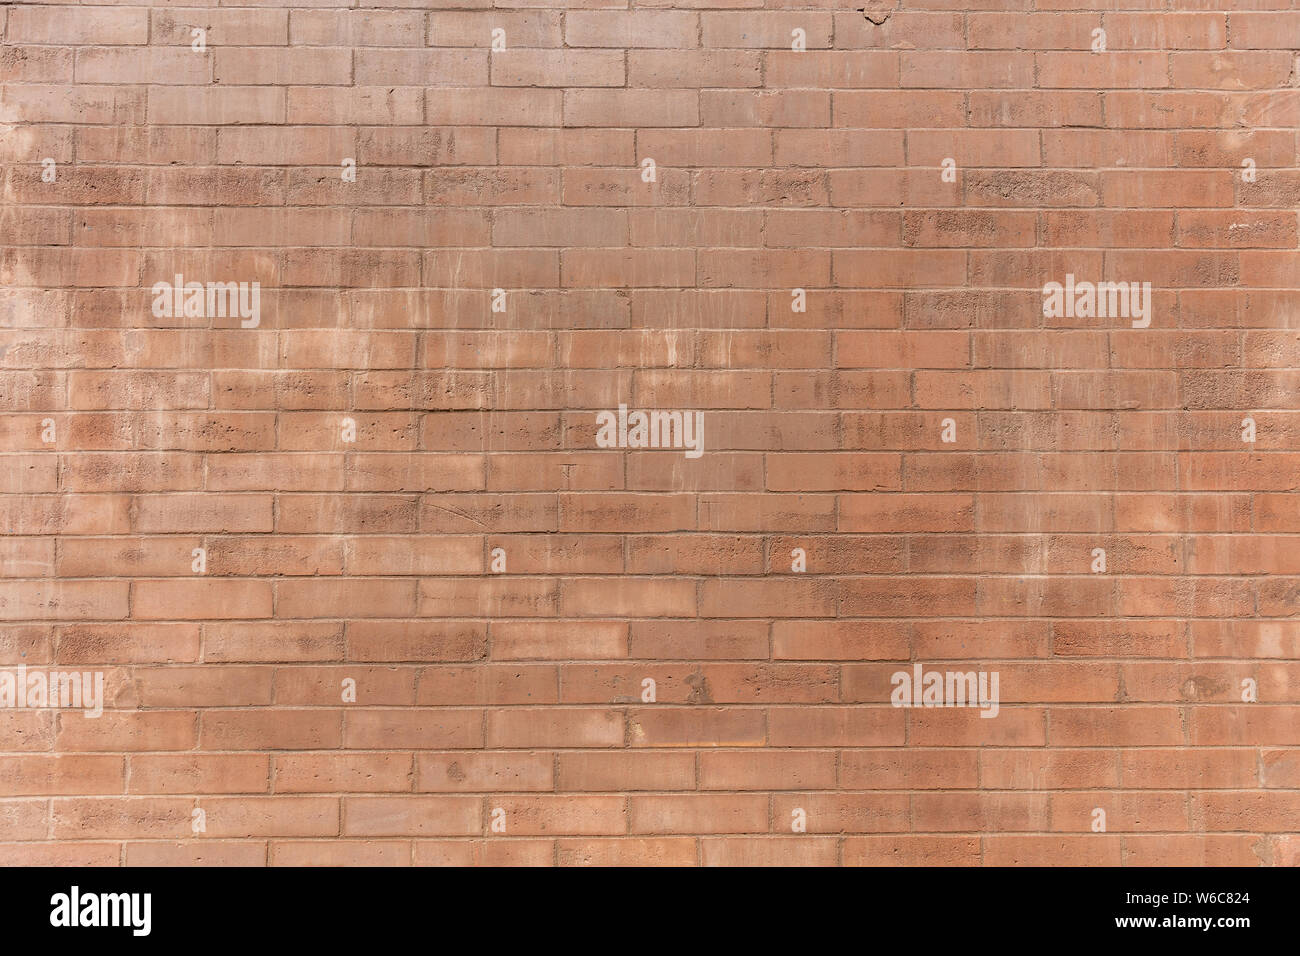 Brown color brick wall texture, full background. Traditional building facade Stock Photo